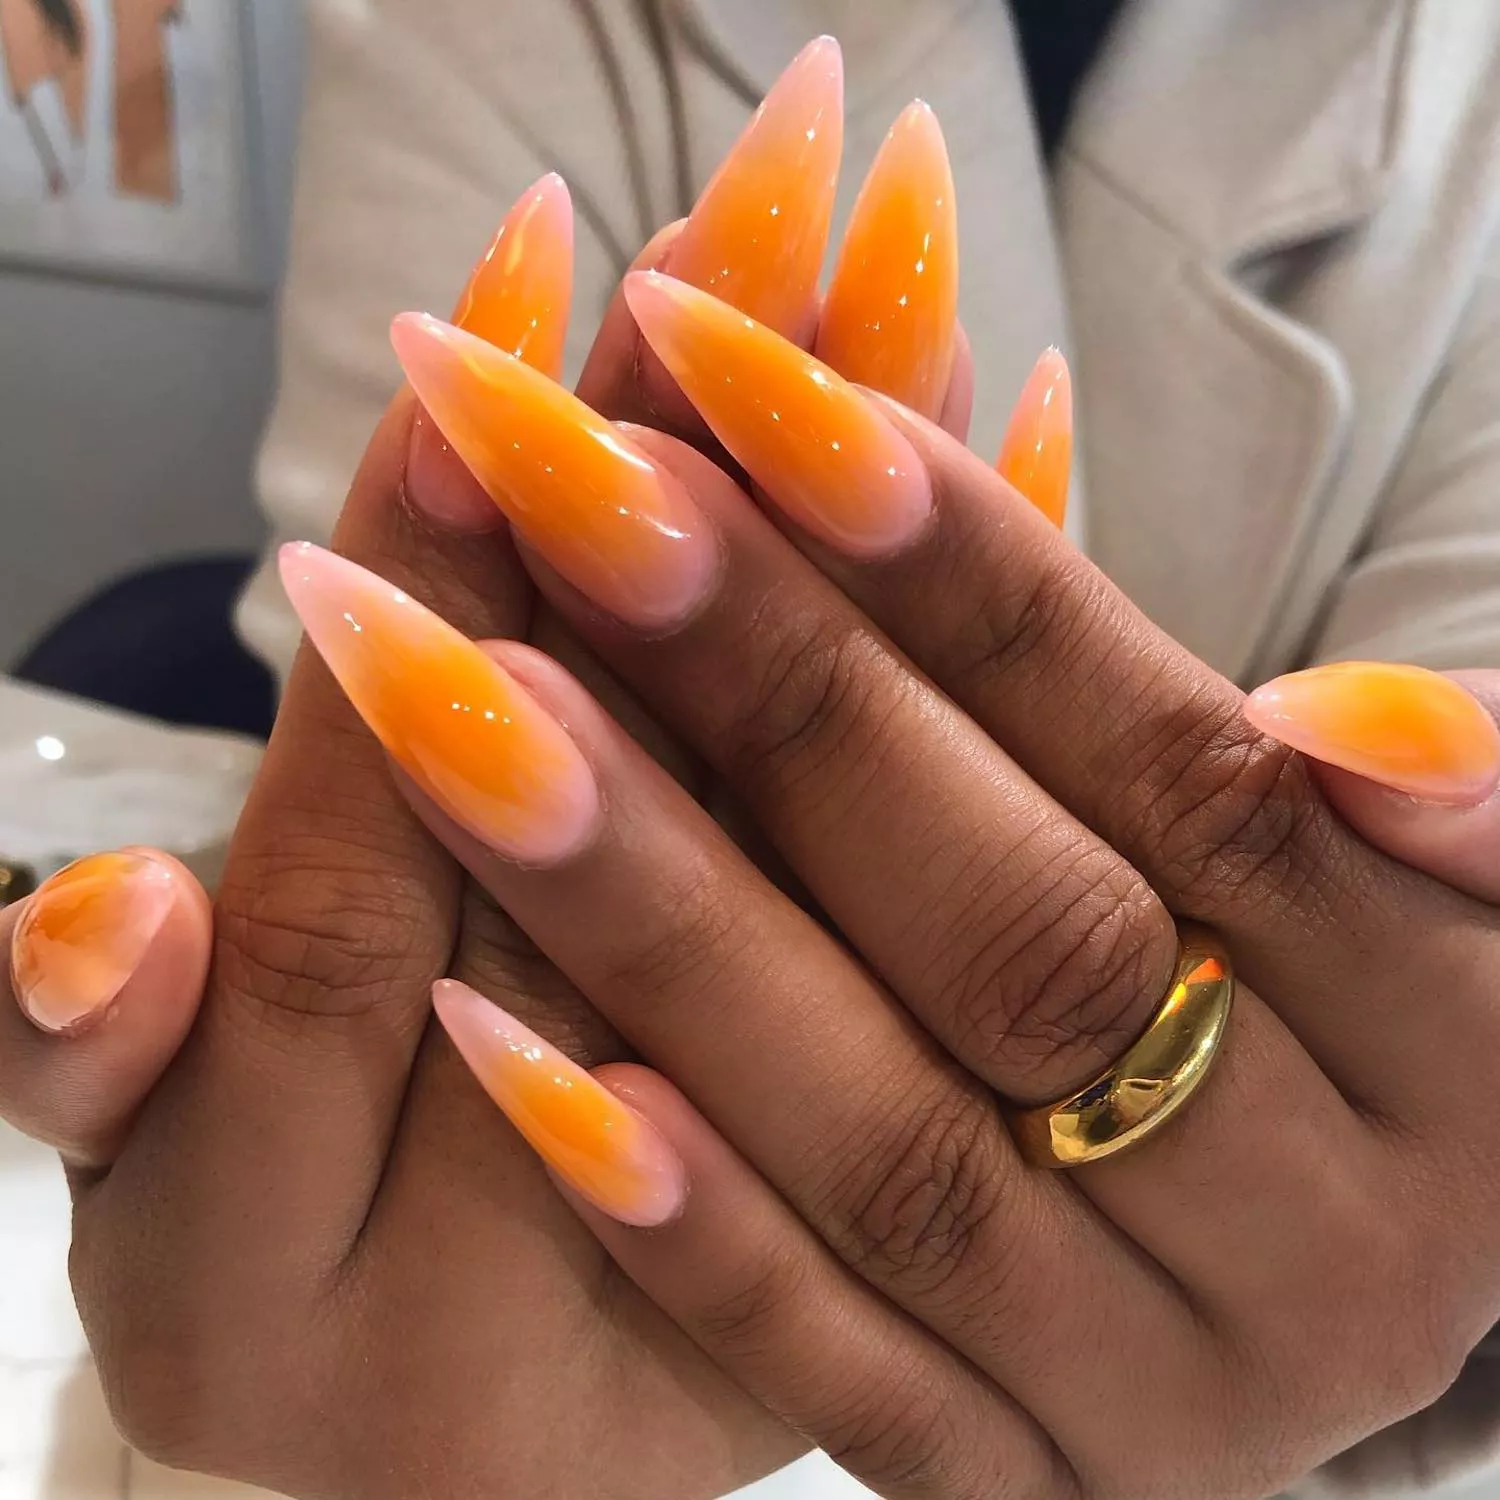 Elongated manicure with orange and pink ombre aura design